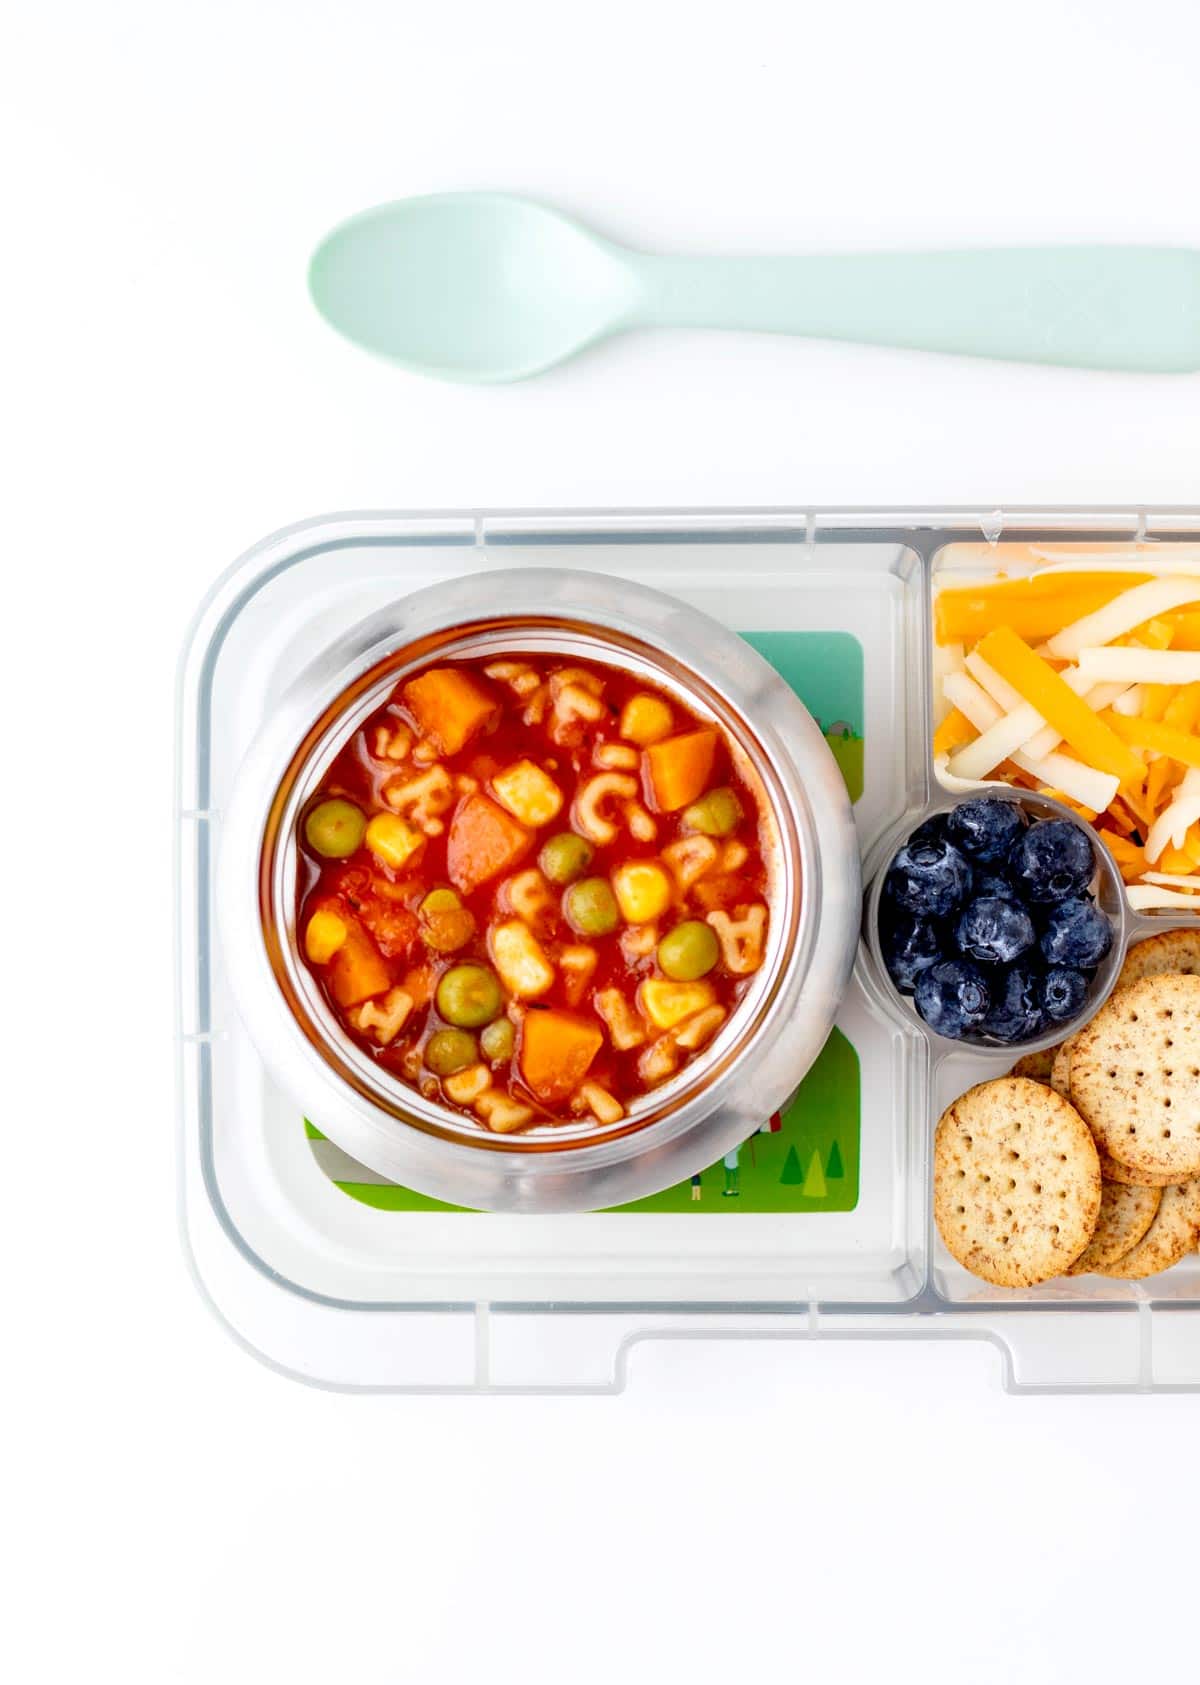 Veggie noodle soup in a thermos in a lunchbox with cheese, crackers and blueberries.